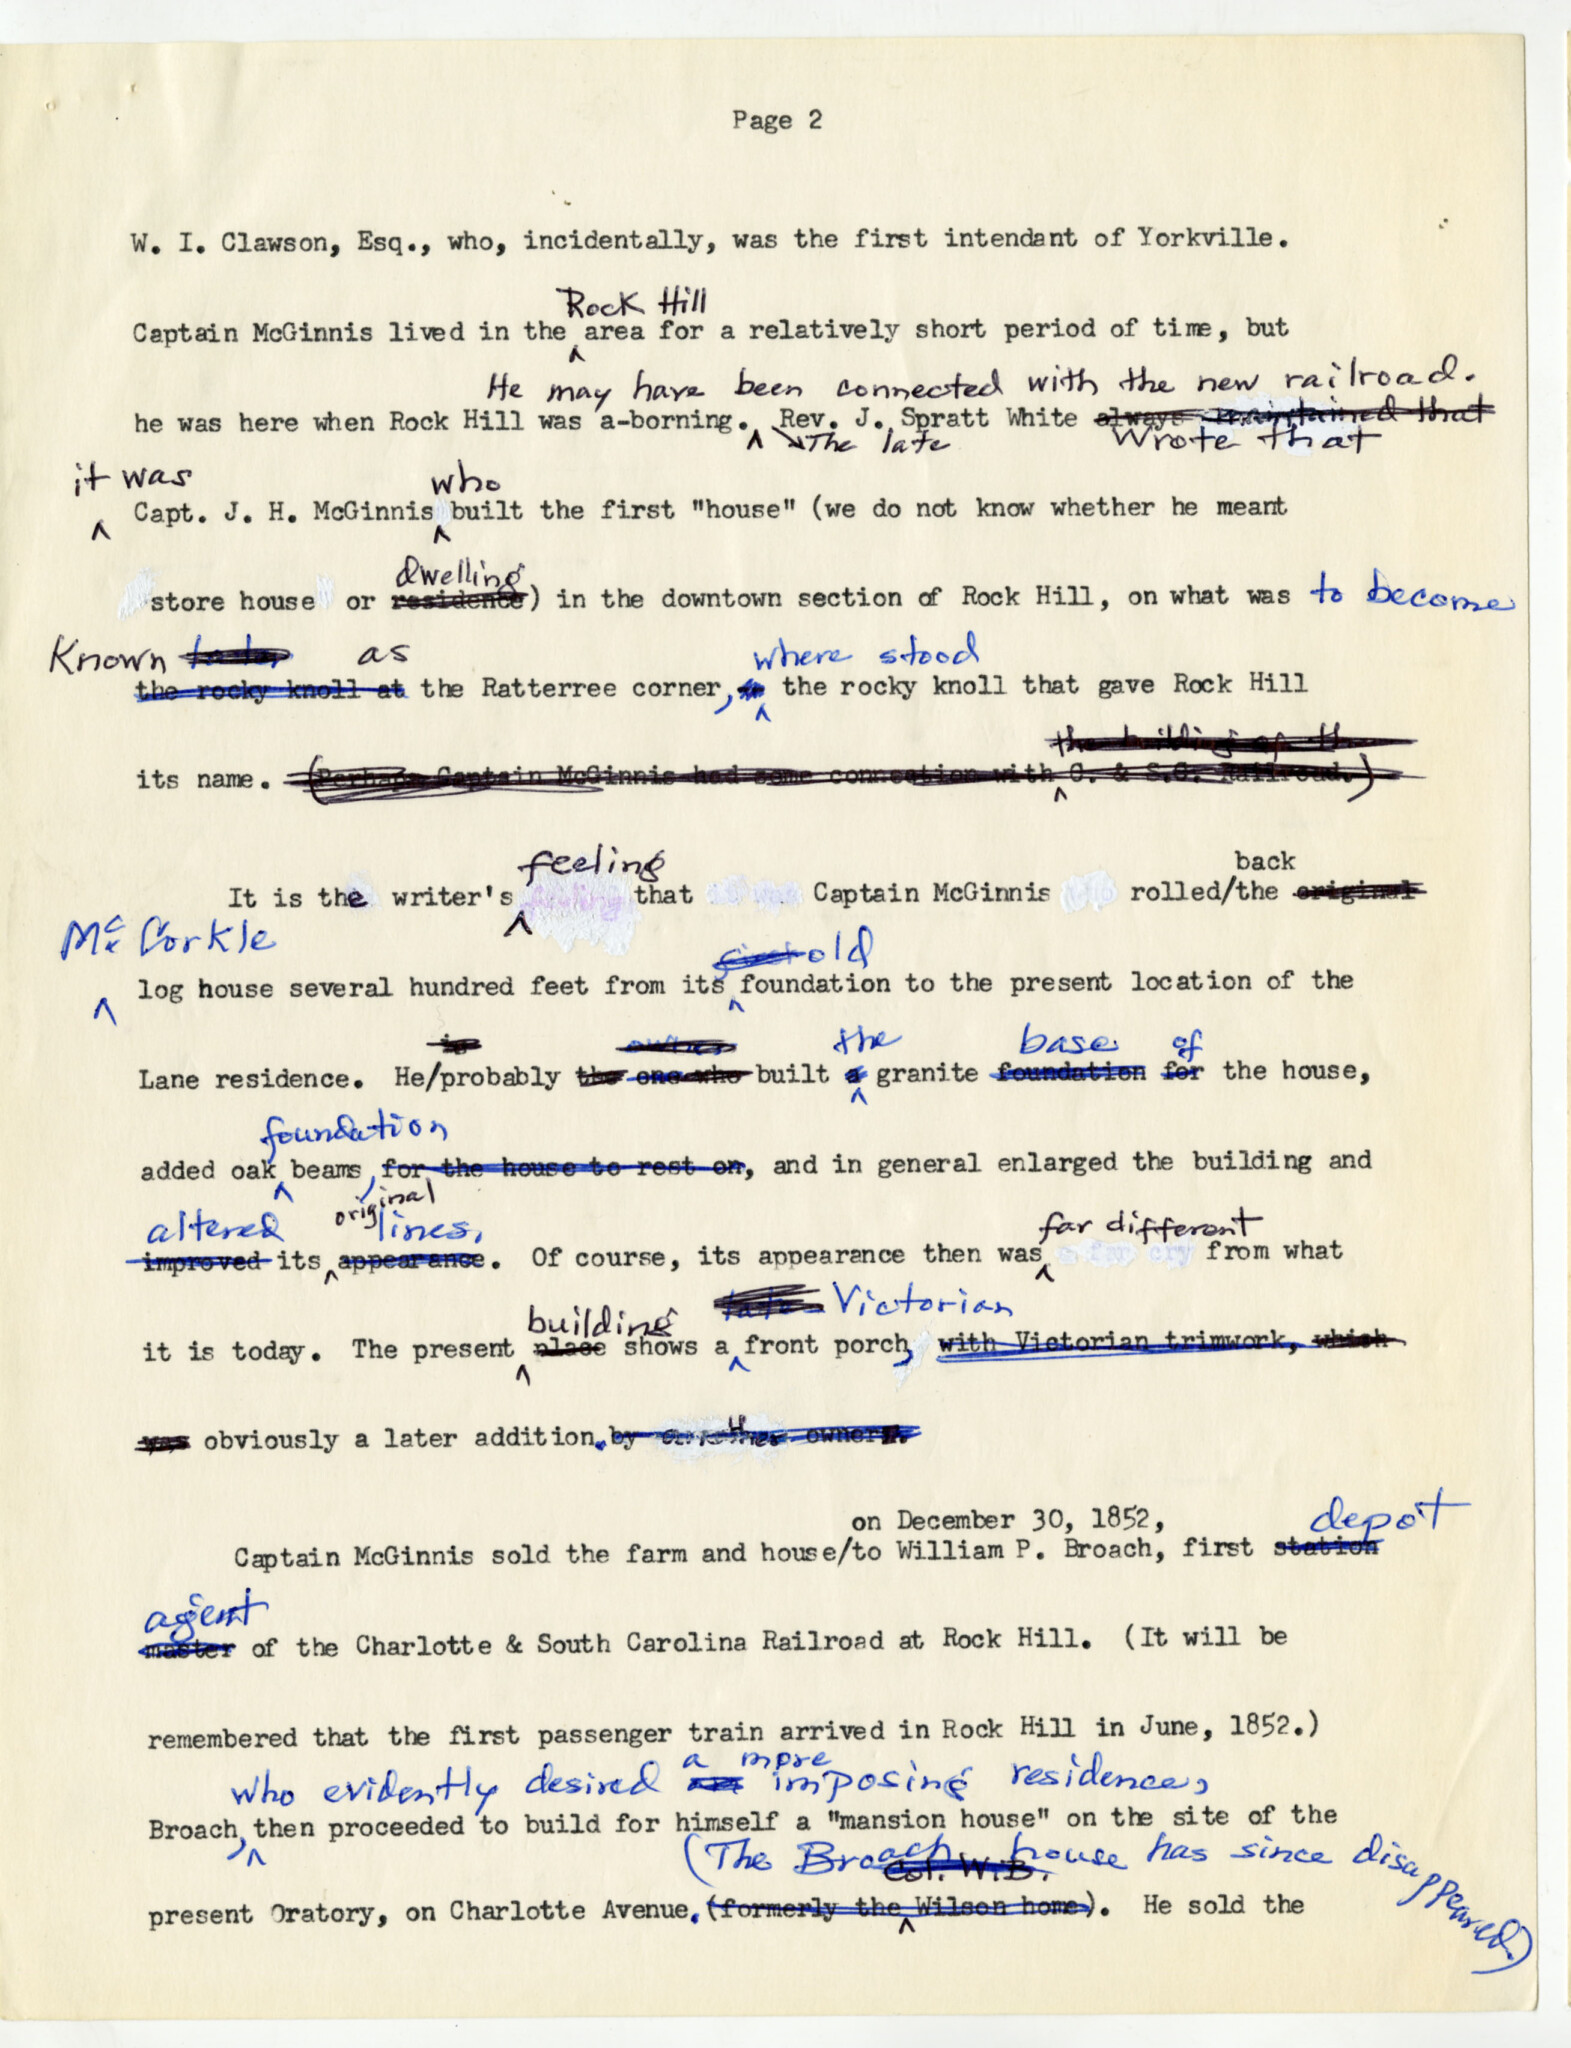 NOTES ON THE HOME BY WM. B. WHITE, JR. P. 2 - WU PETTUS ARCHIVES